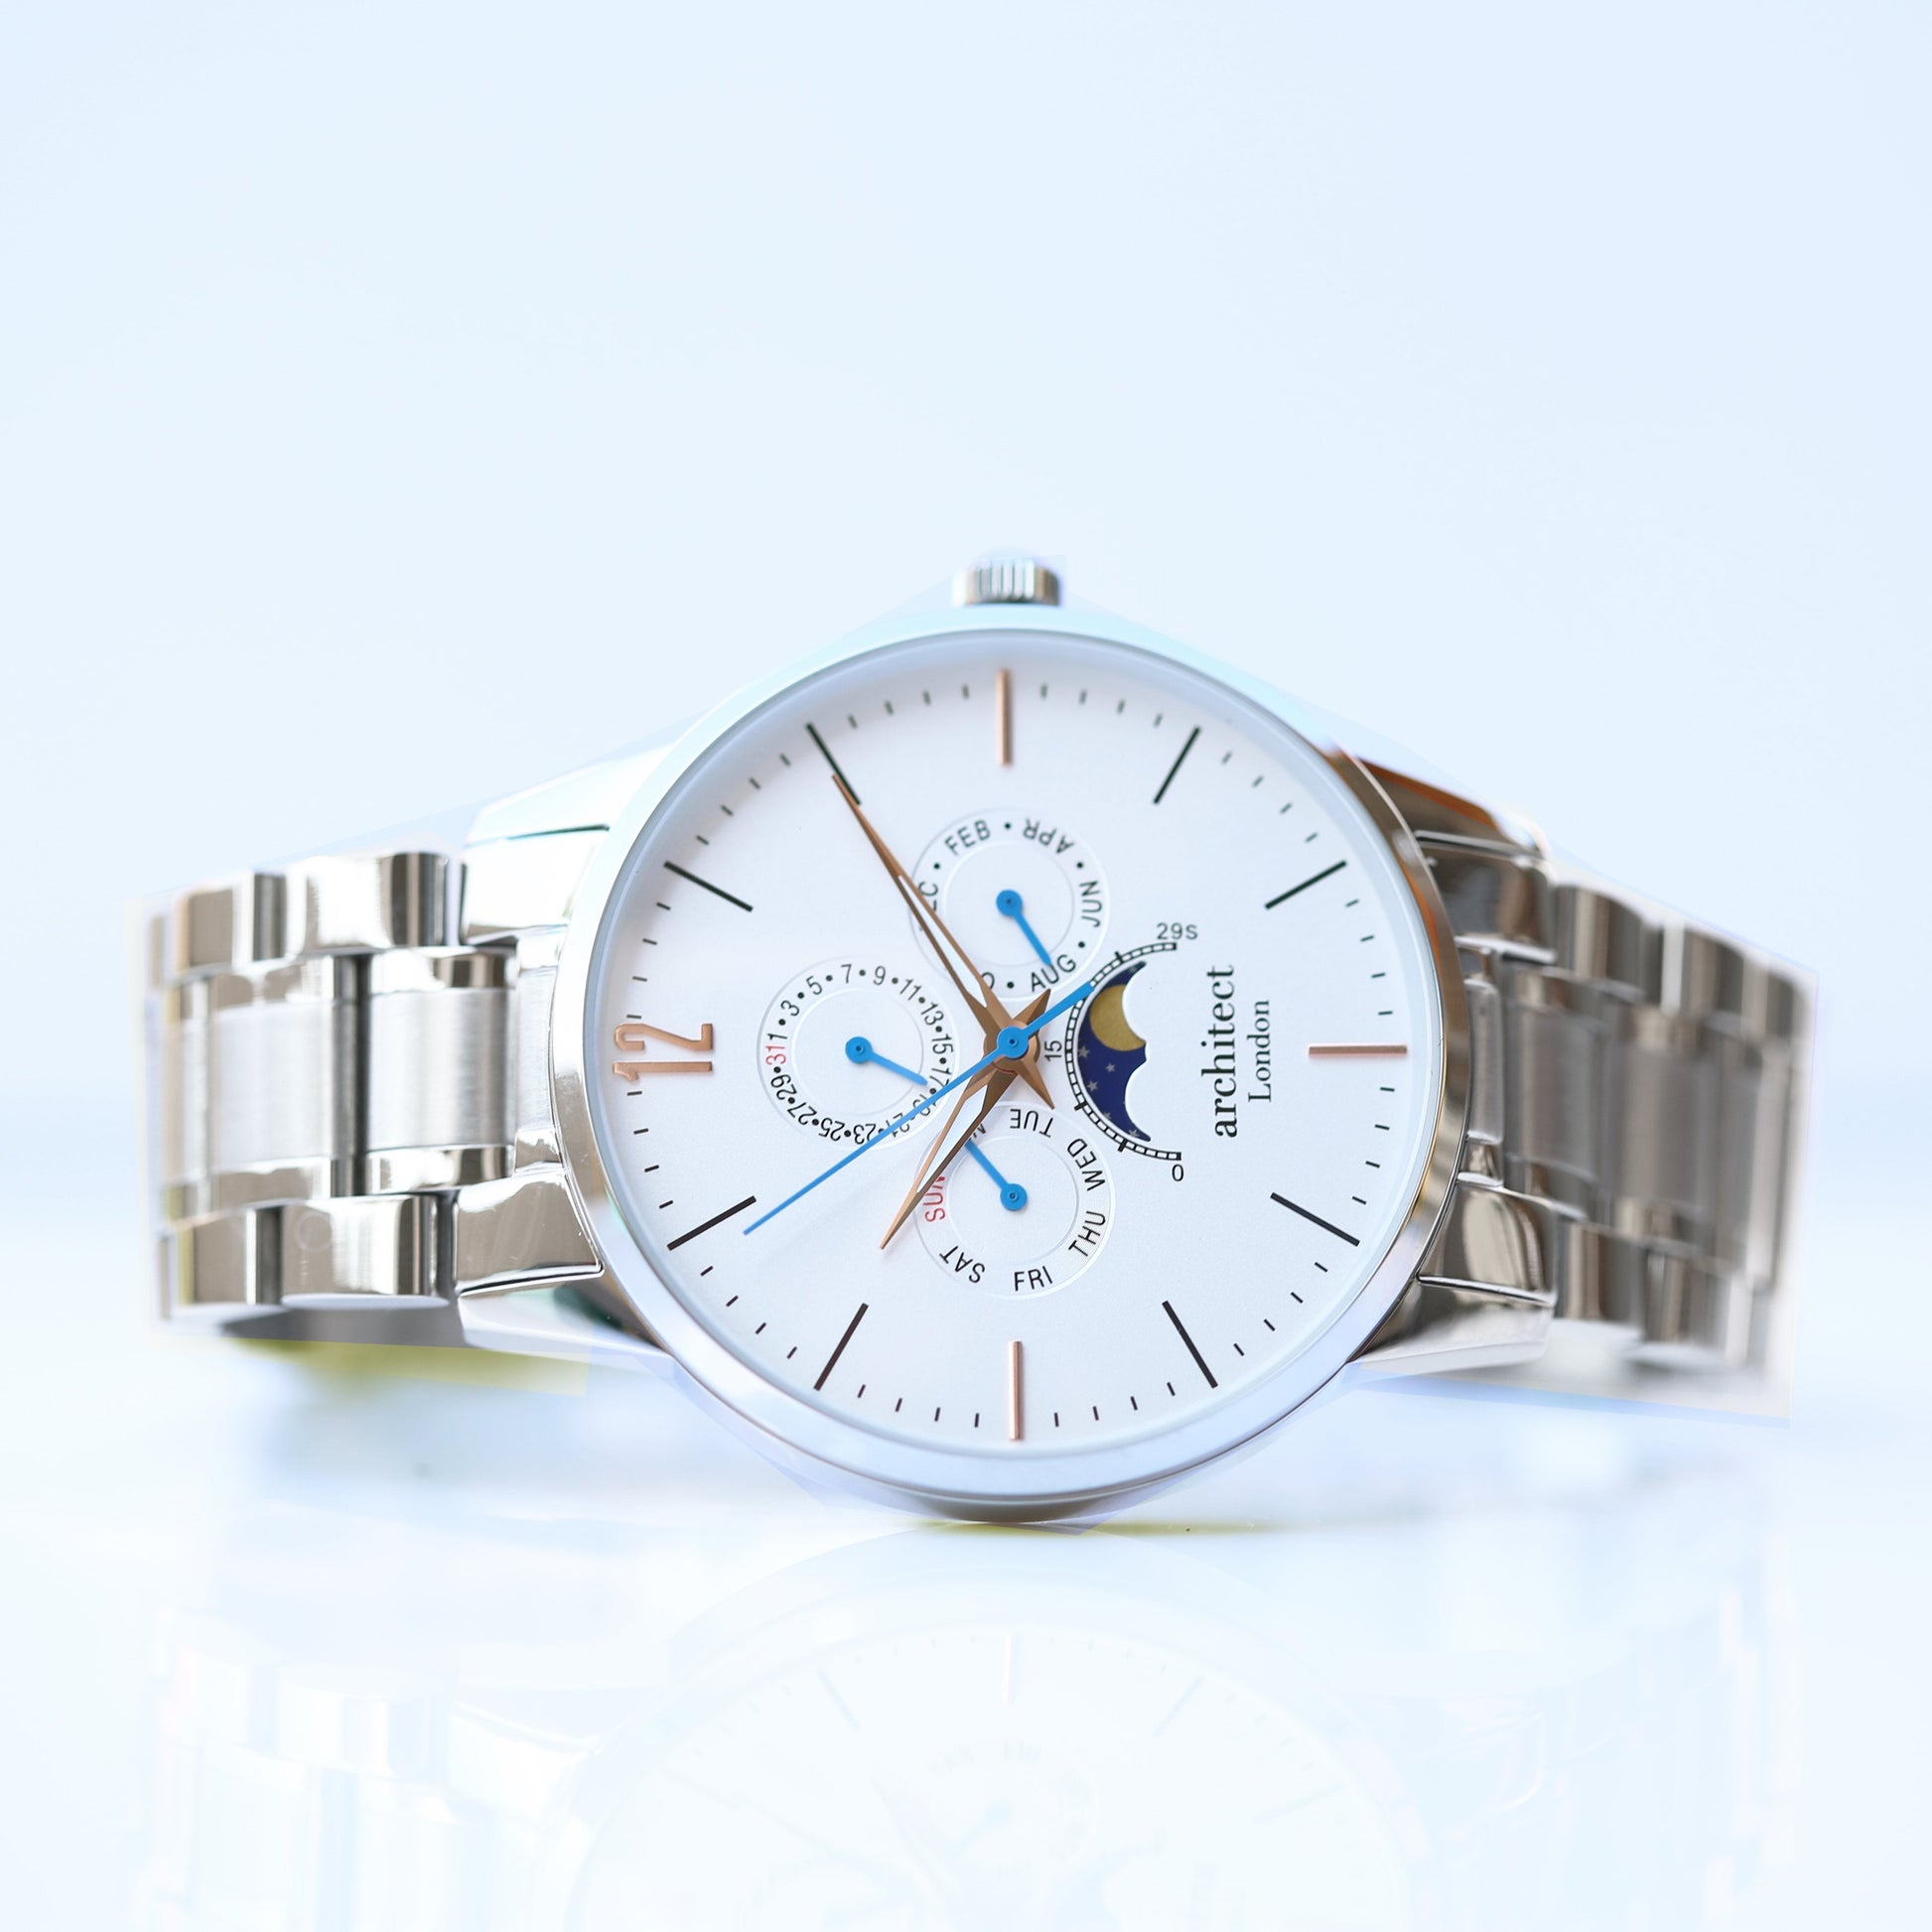 Personalized Men's Watches - Men's Architect Apollo Personalized Watch In White 